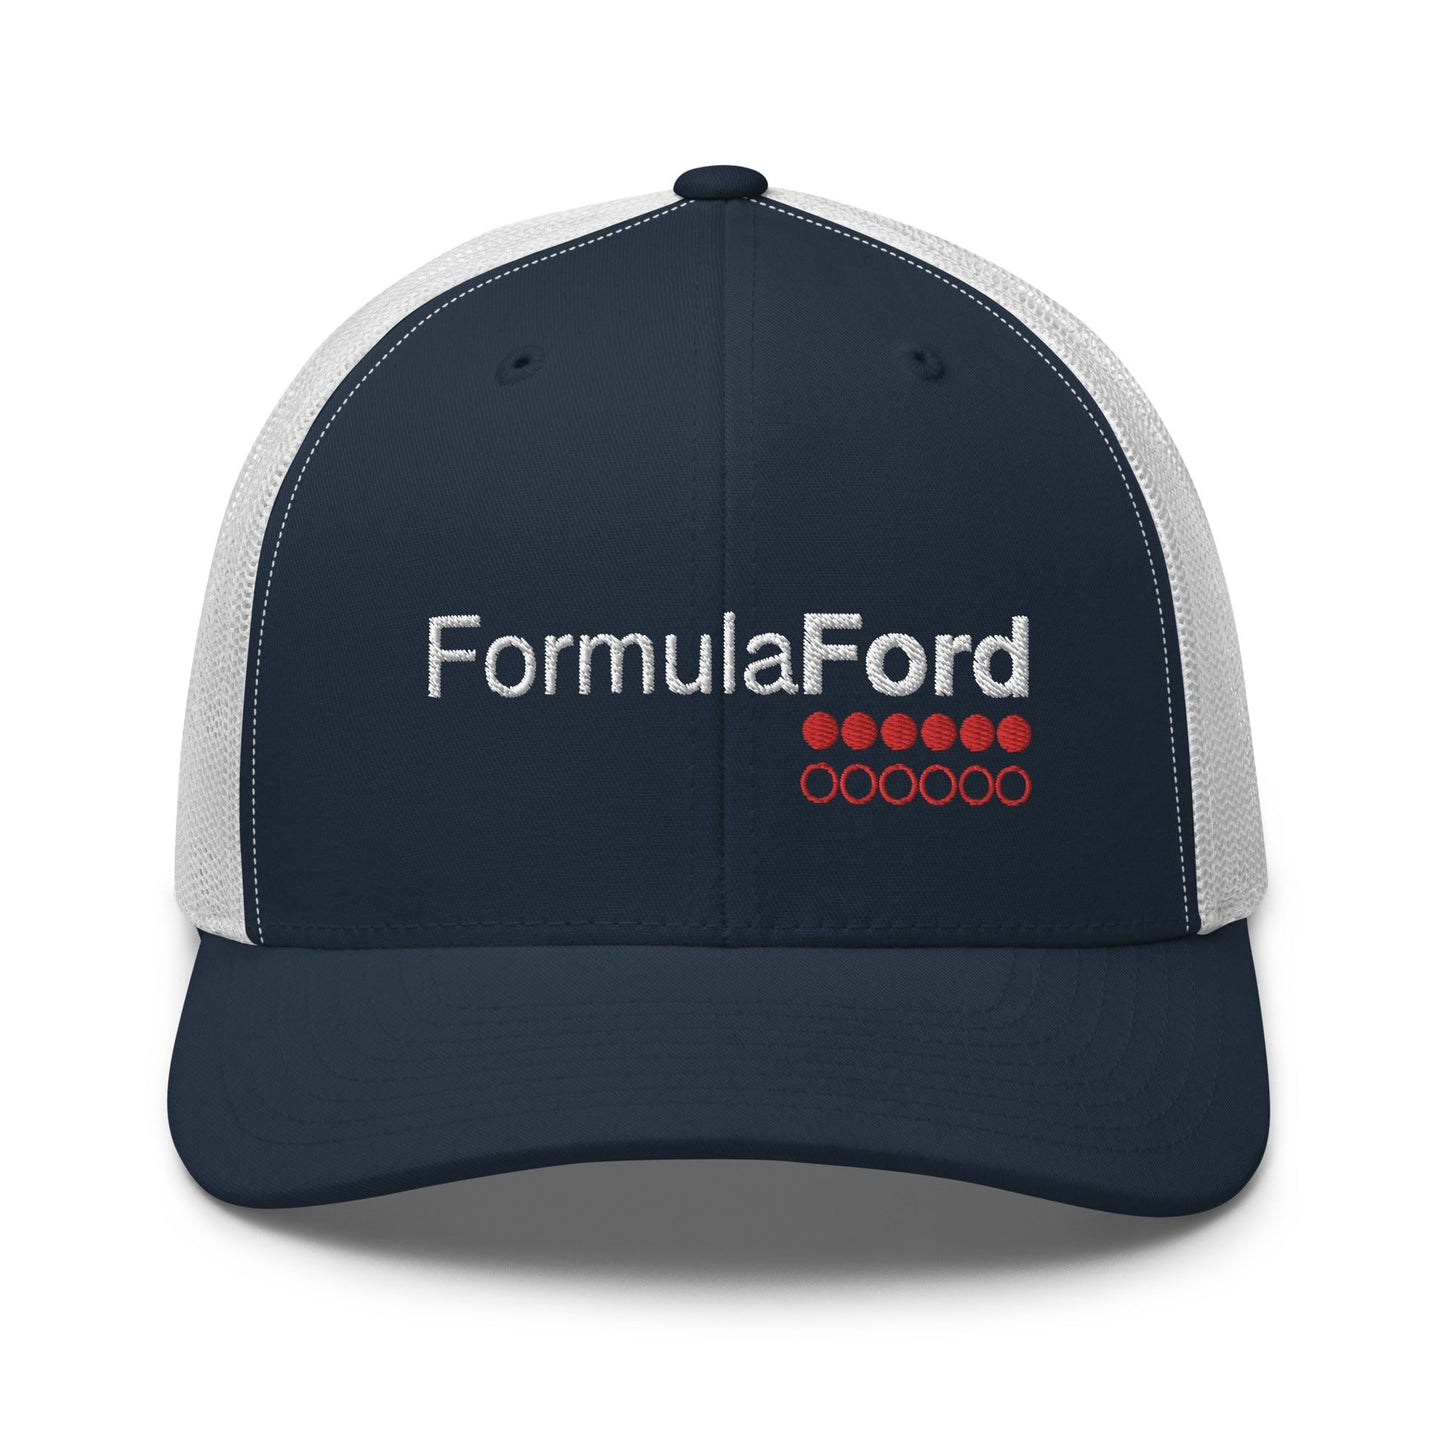 FORMULA FORD Official Embroidered Trucker Cap - Navy/white